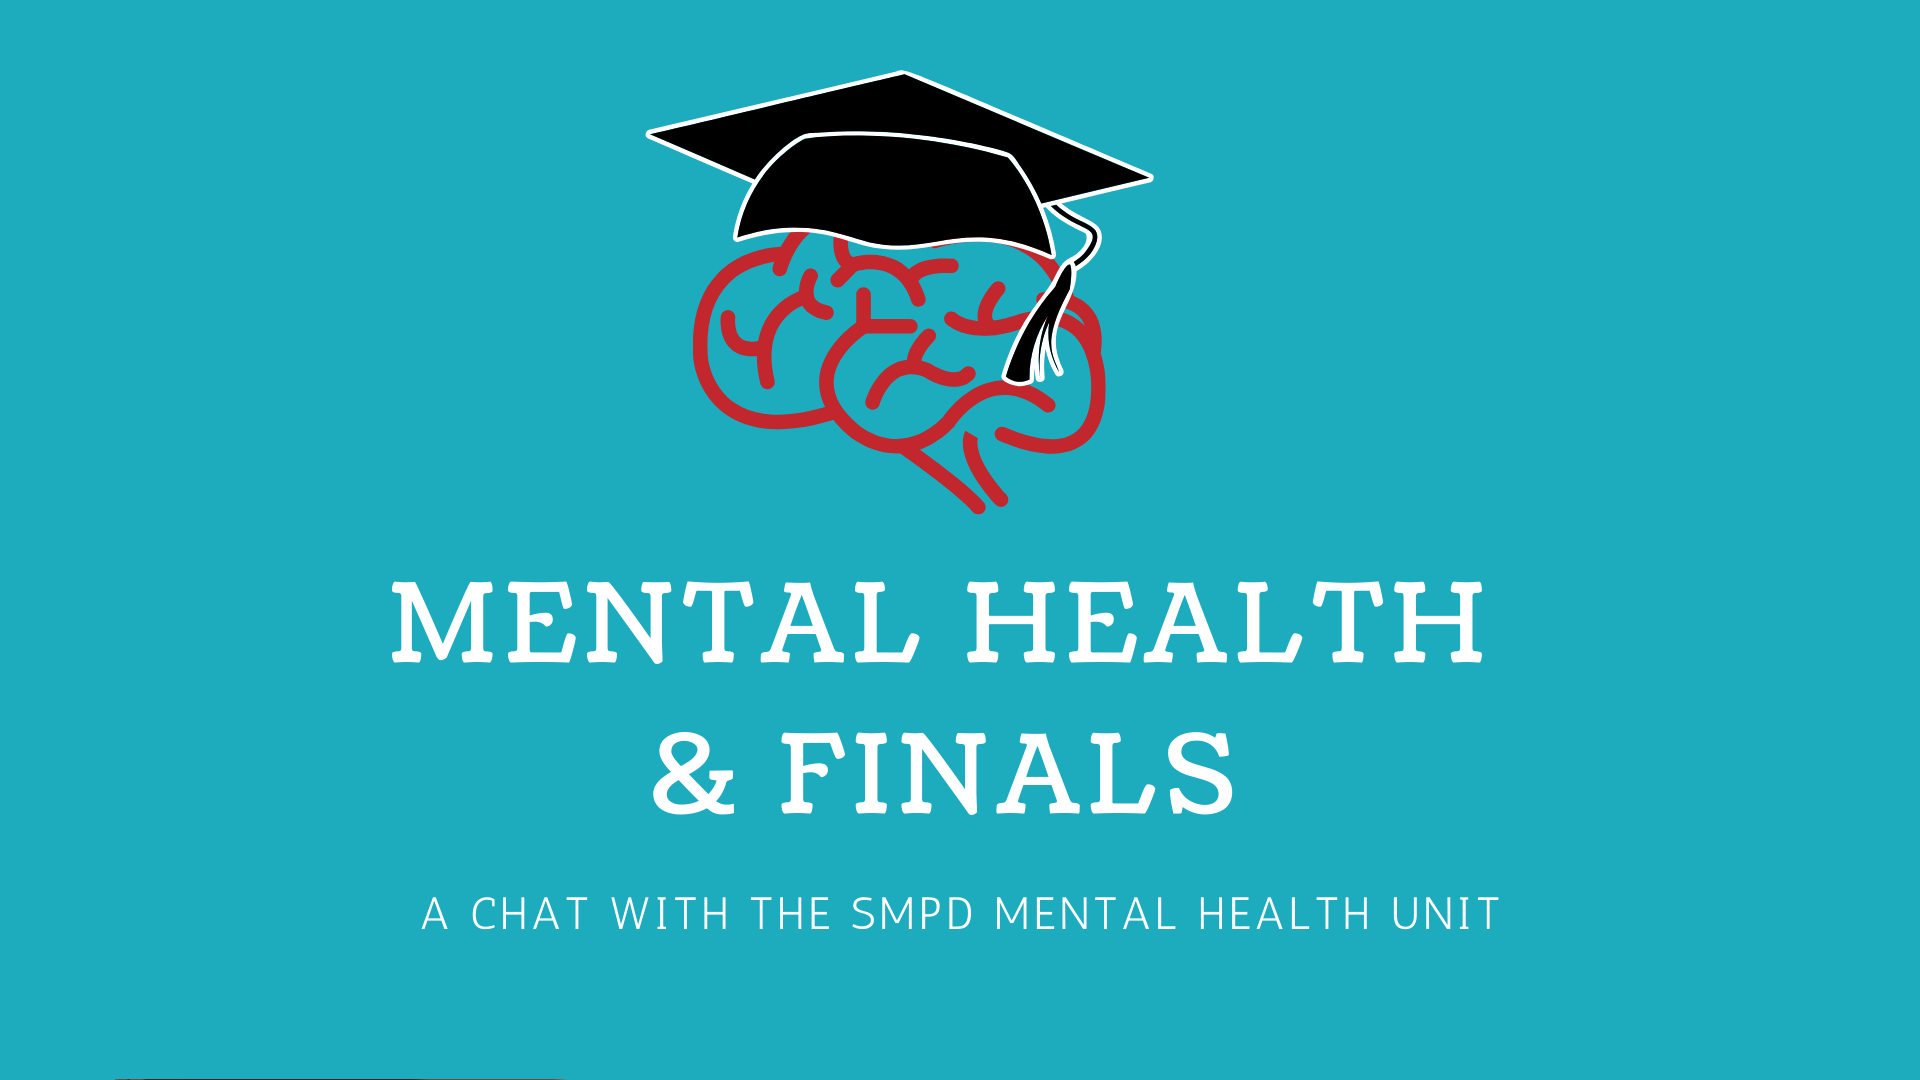 A blue background with text that says, “Mental Health & Finals a chat with the SMPD mental health unit. A red brain with a graduation cap is above.